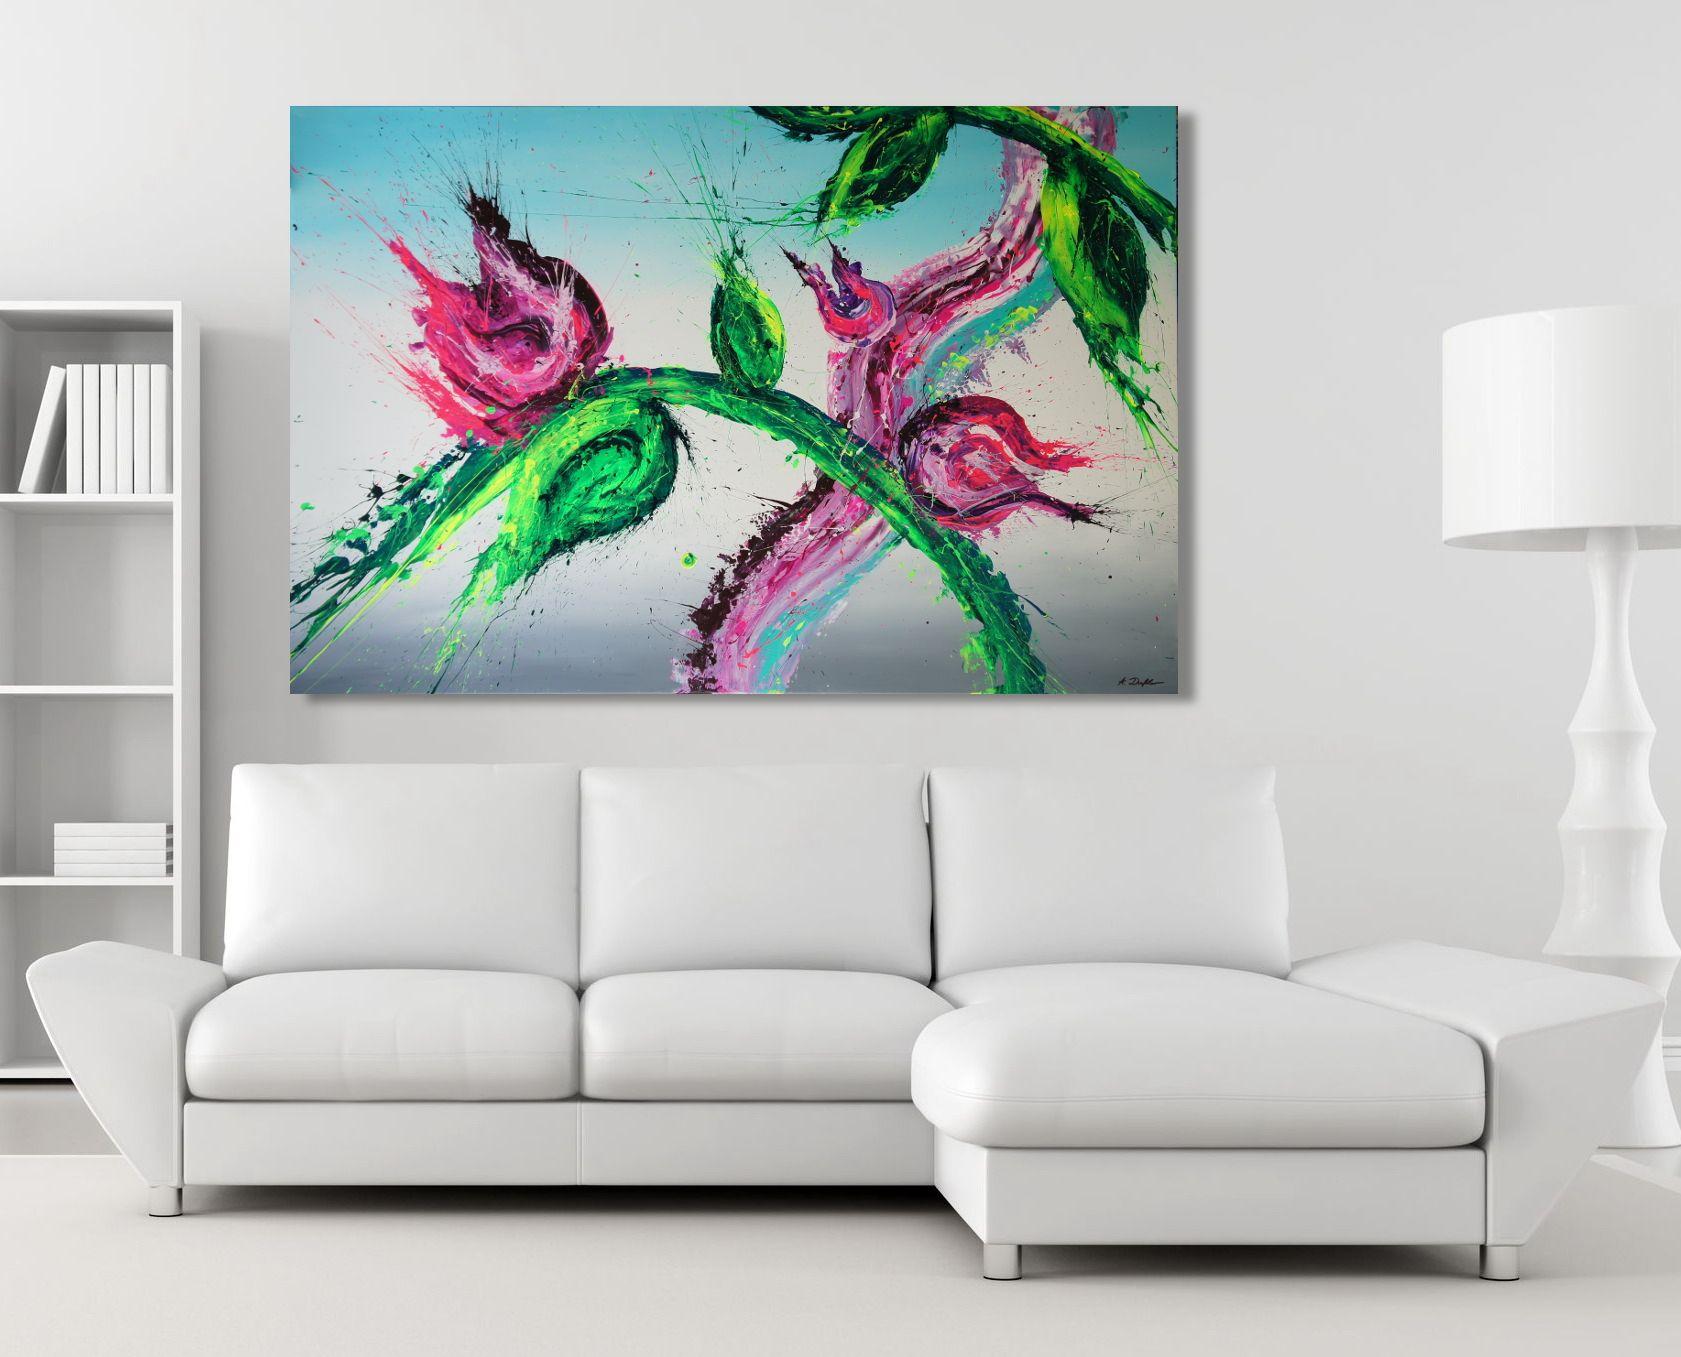 Here is a huge rectangle piece from my unique Spirits Of Skies Collection. This one is a bit atypical in the sense that itâ€™s not fully abstract. One can make out blooming flowers in magenta pink and white, green leaves and stems. All in a very